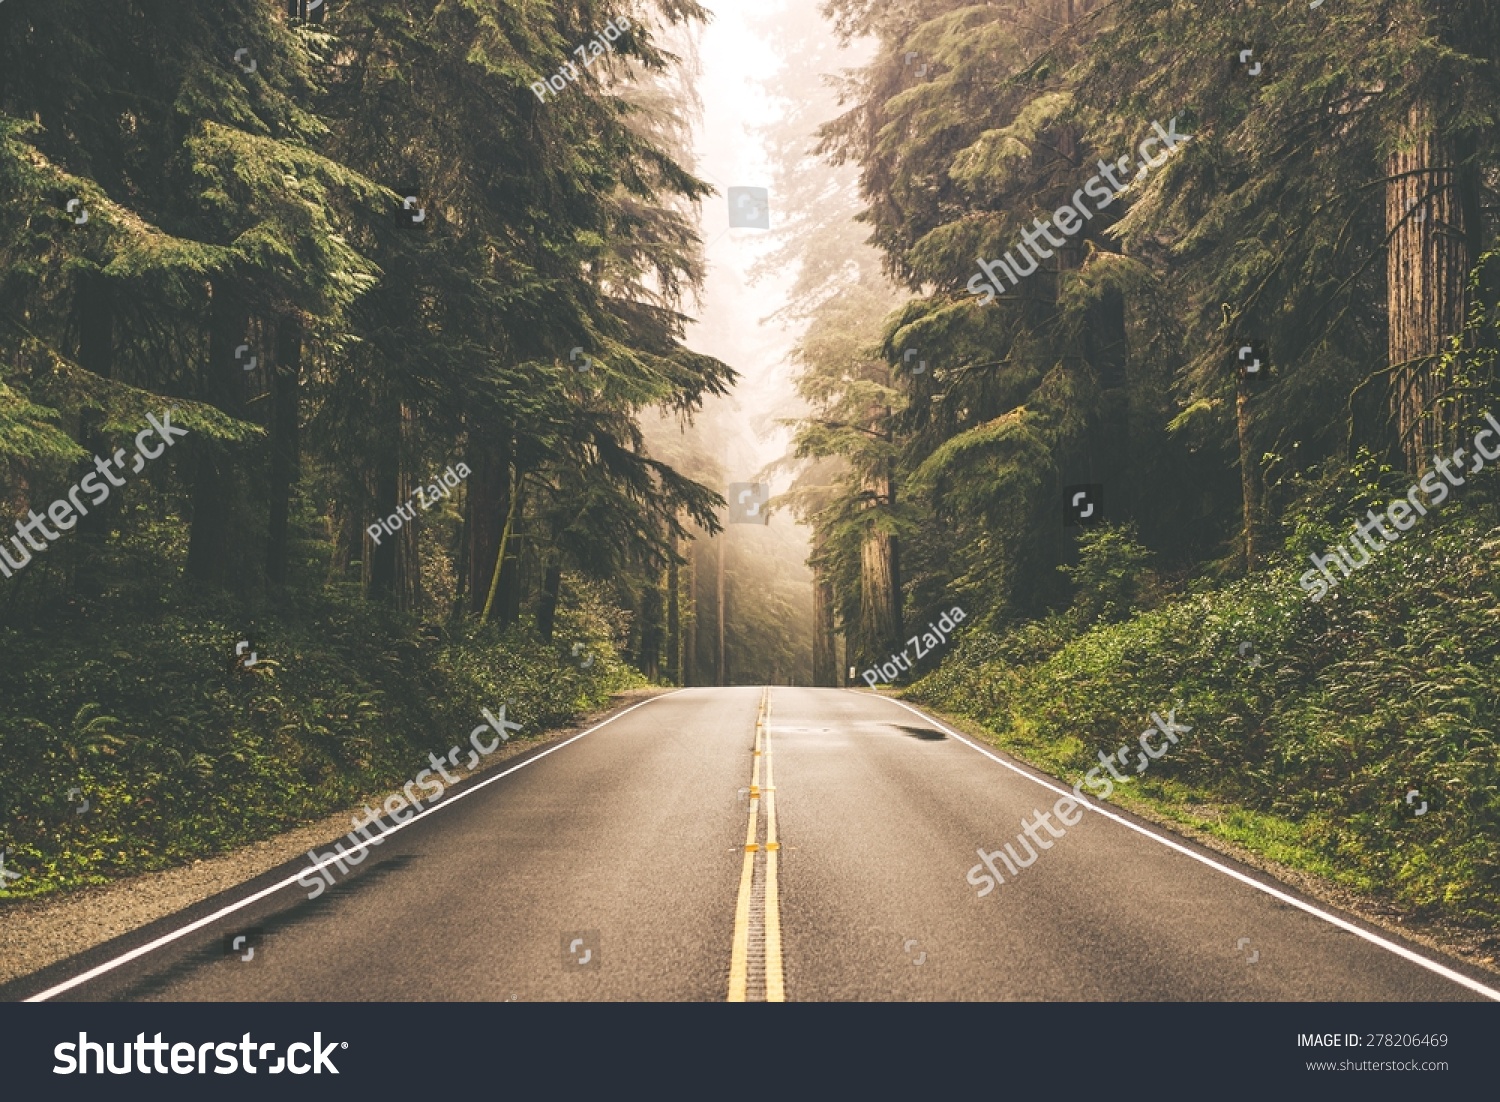 Foggy Straight Redwood Highway in Northern California, United States #278206469